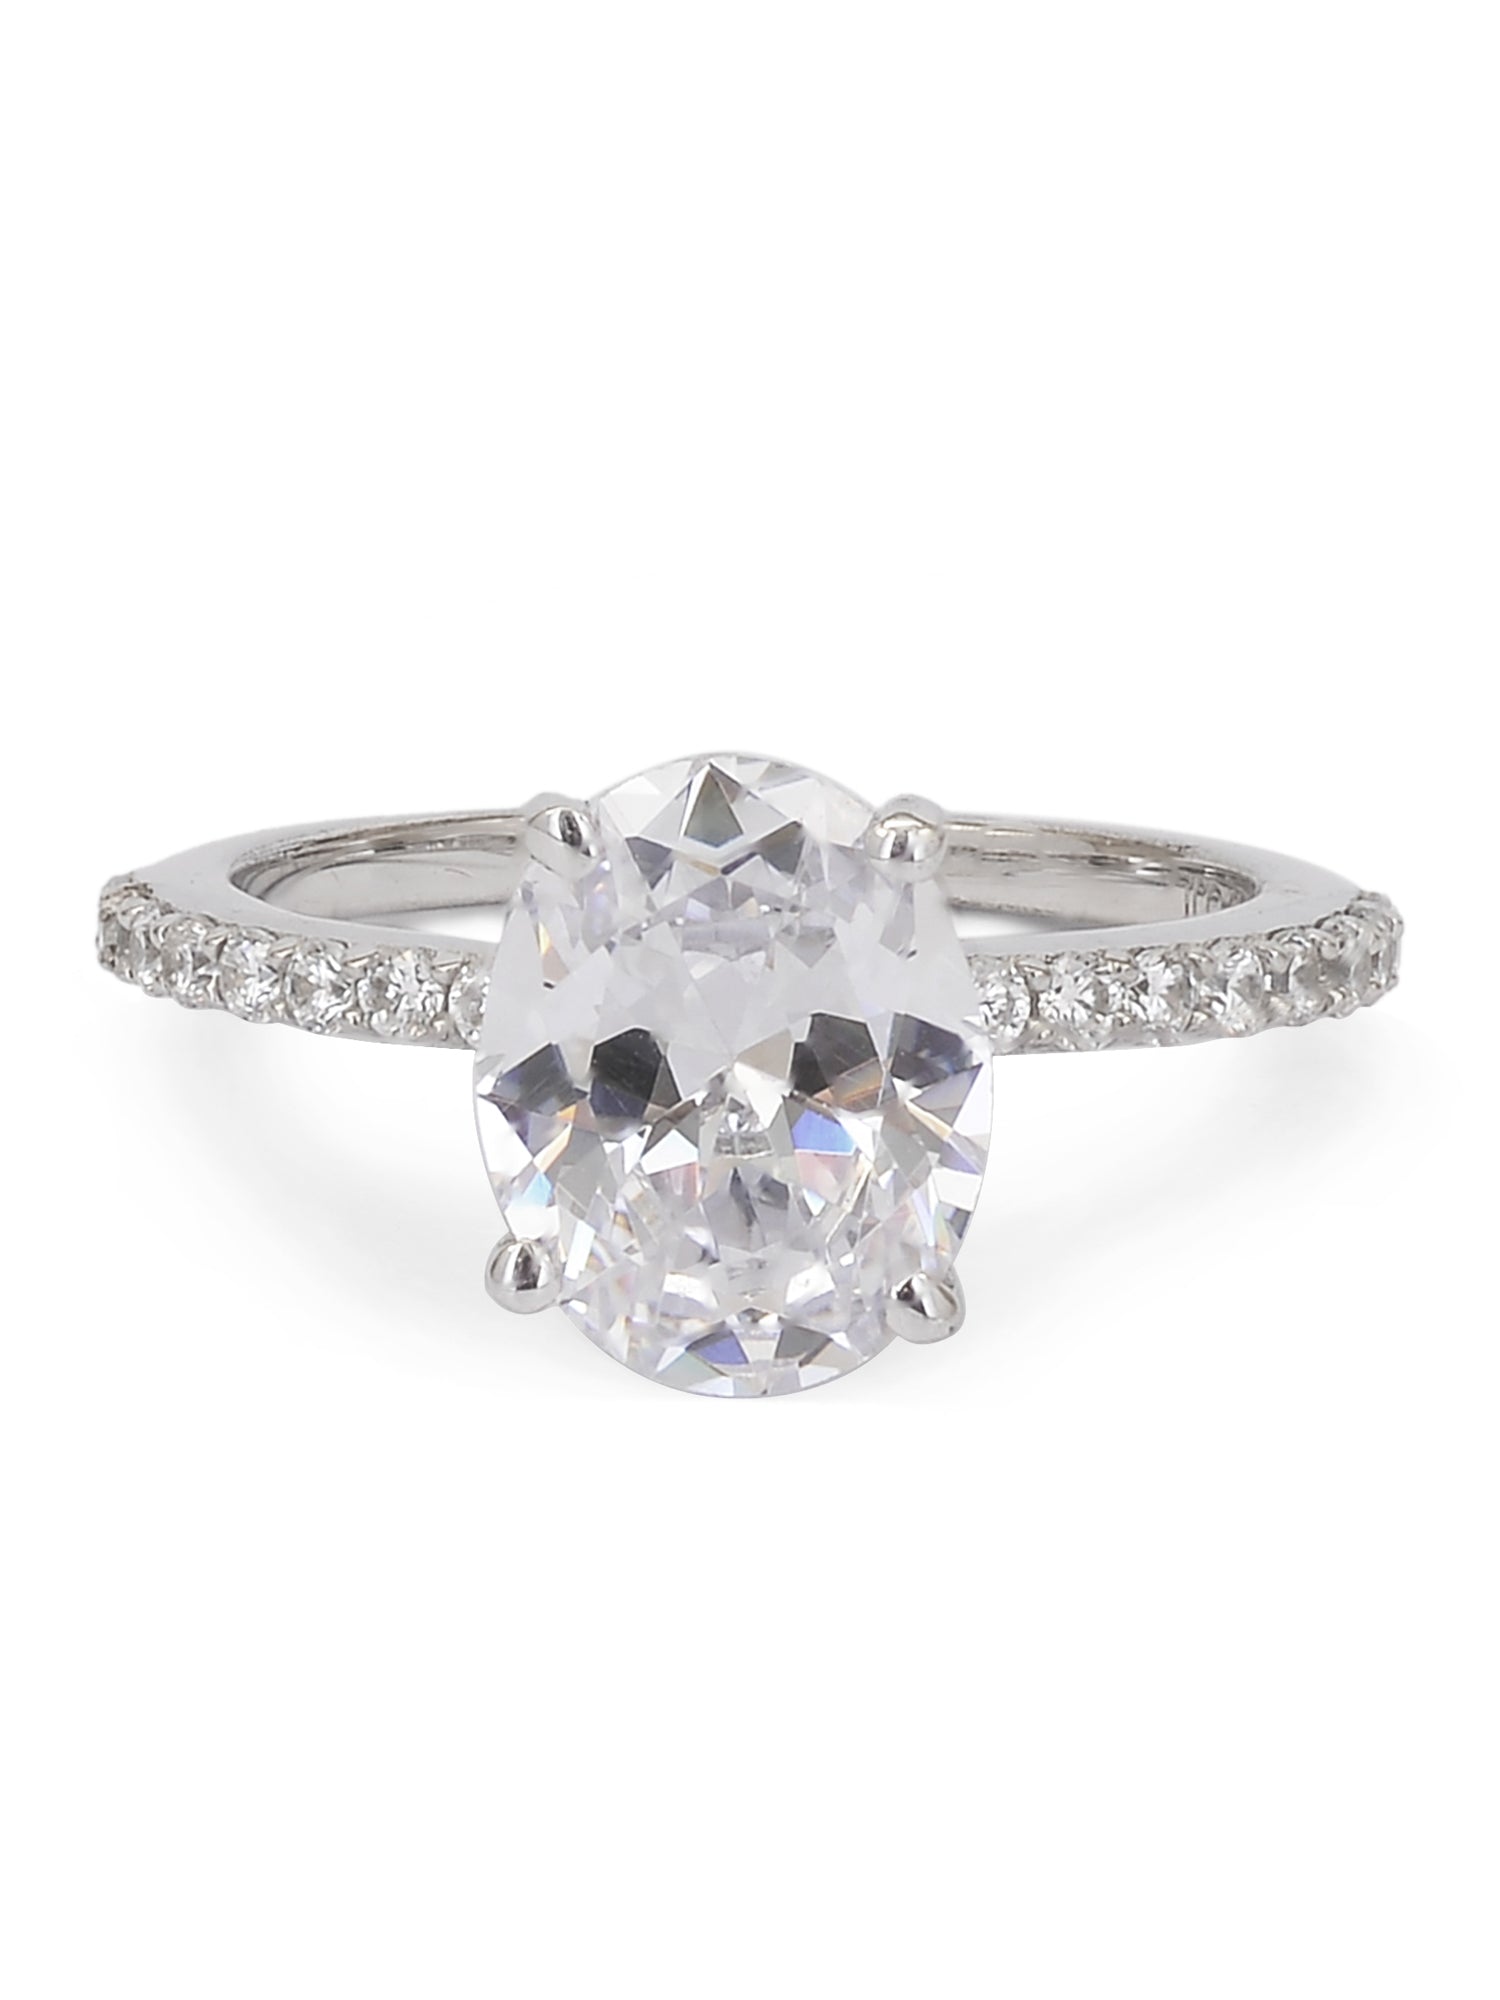 ORNATE JEWELS 4.5 CARAT SOLITAIRE RING FOR WOMEN